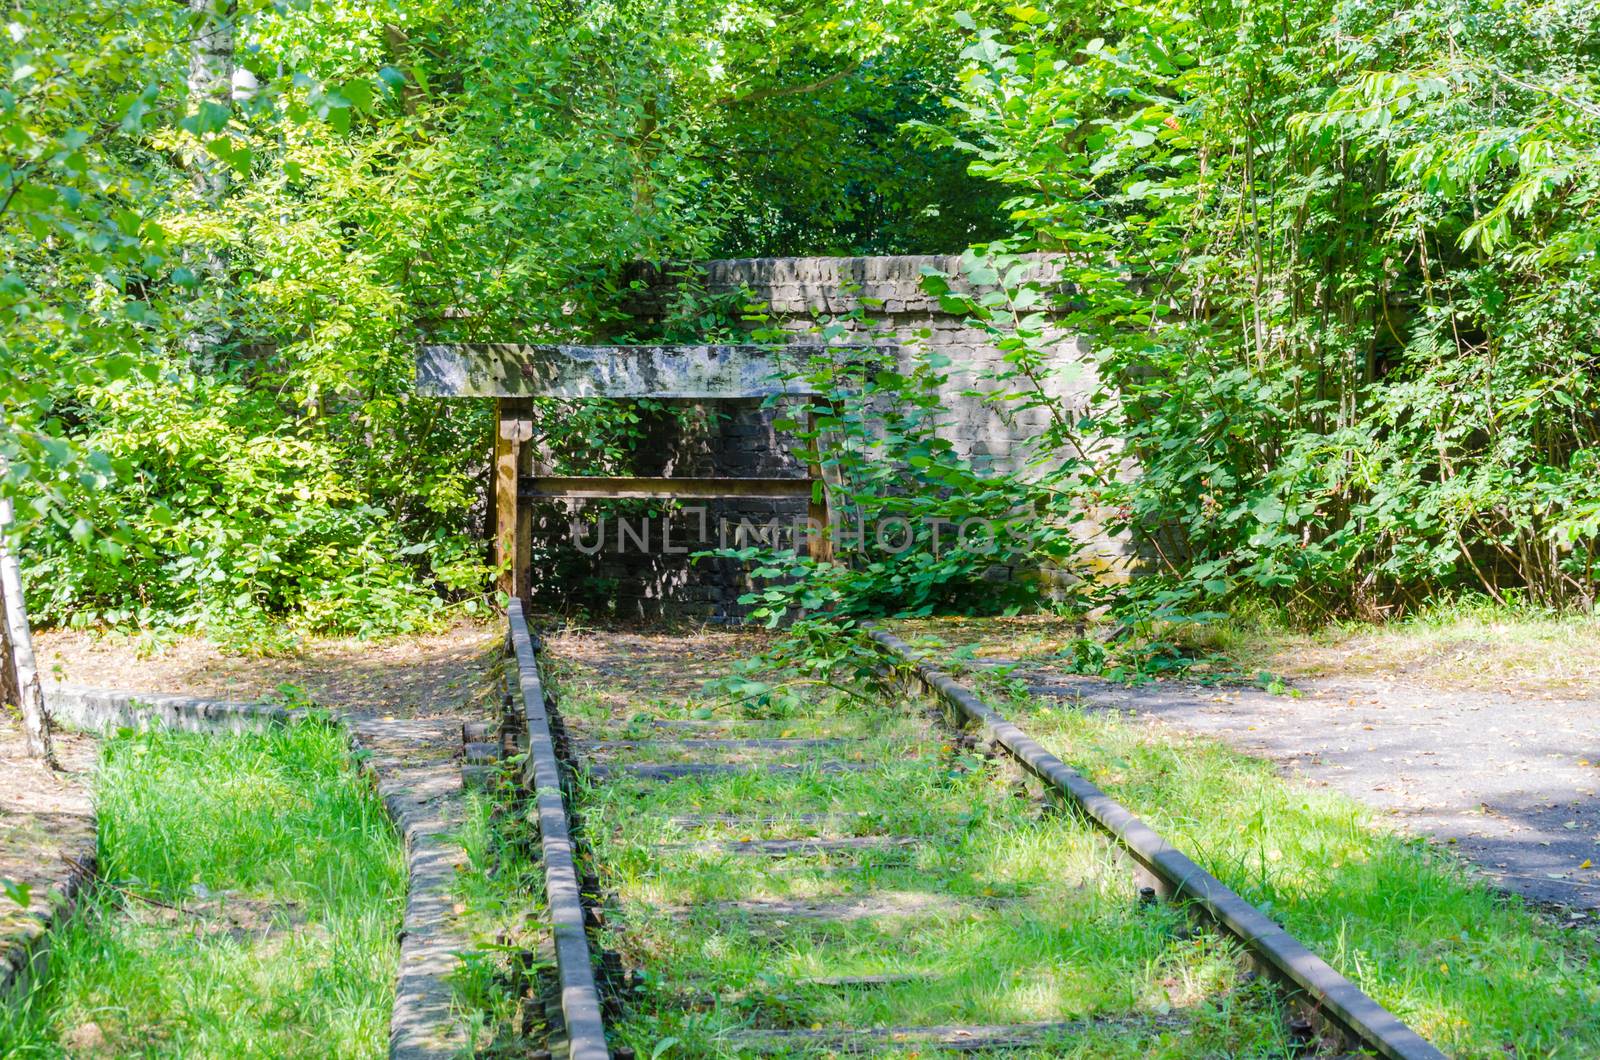 The end of a railway line, by nature overgrown tracks leading into nothing at the Landscape Park Duisburg Nord. 
